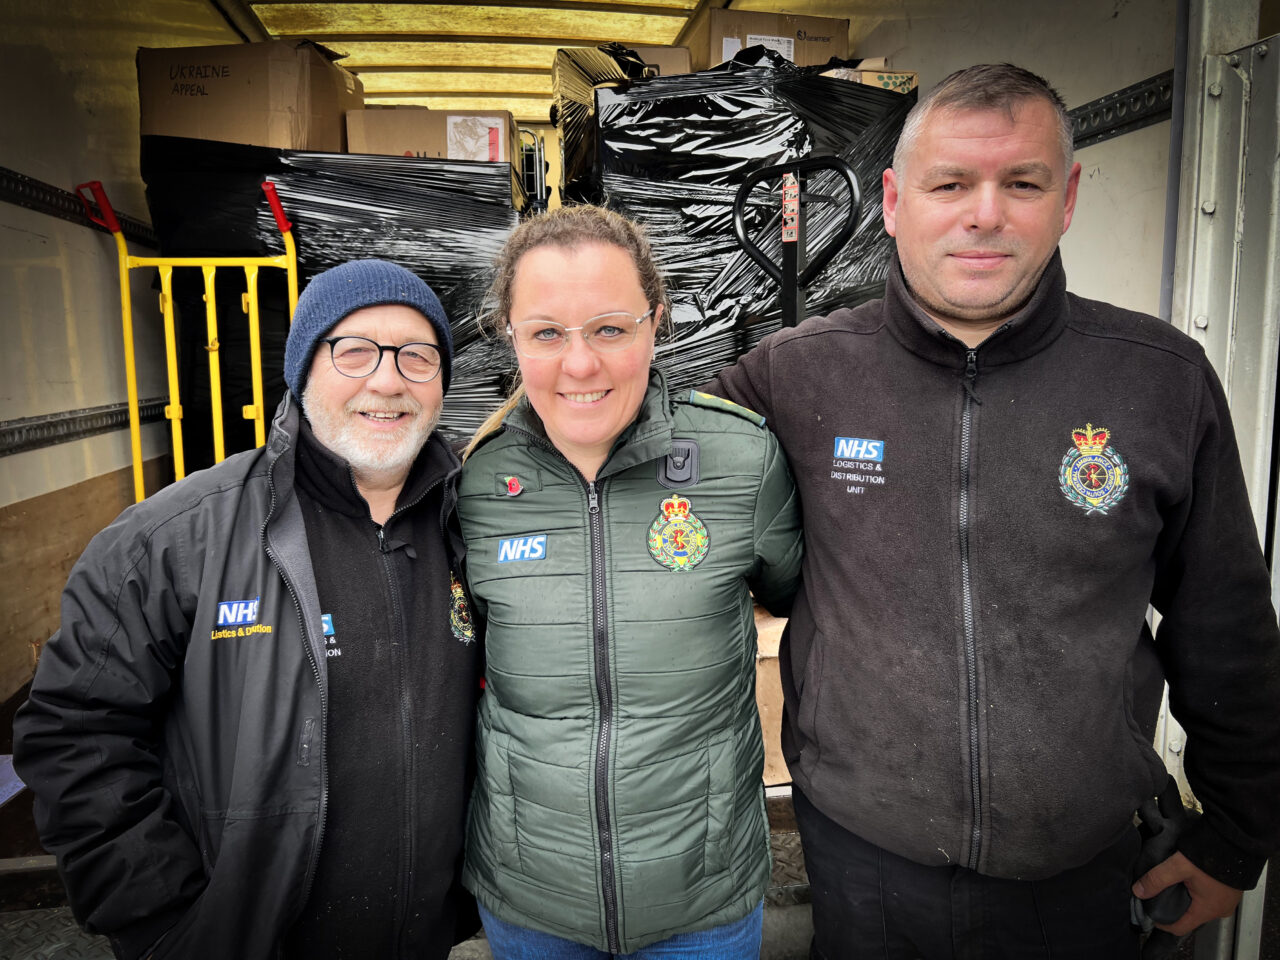 Three people standing arm-in-arm in front of a lorry load of supplies